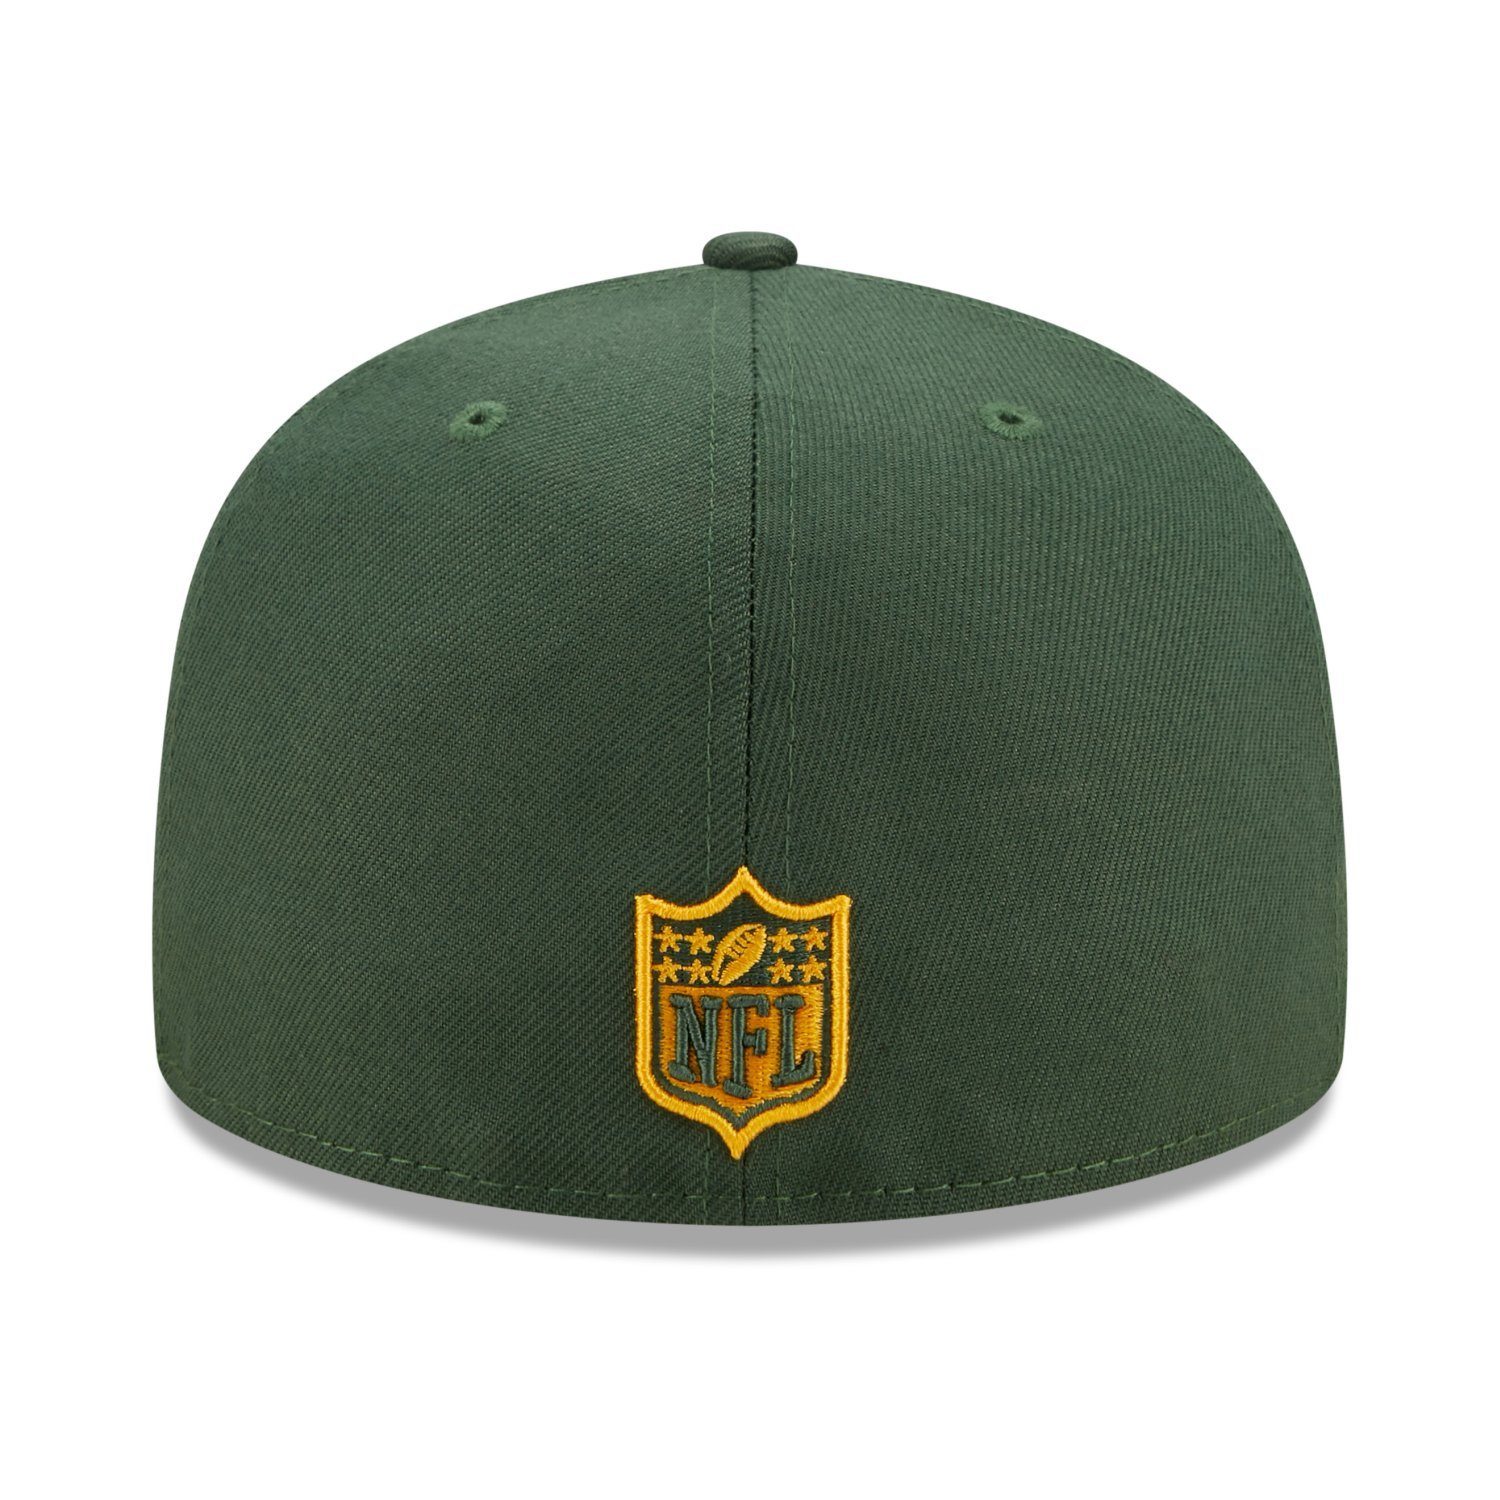 59Fifty Green Era Fitted SIDE Bay PATCH Cap New Packers